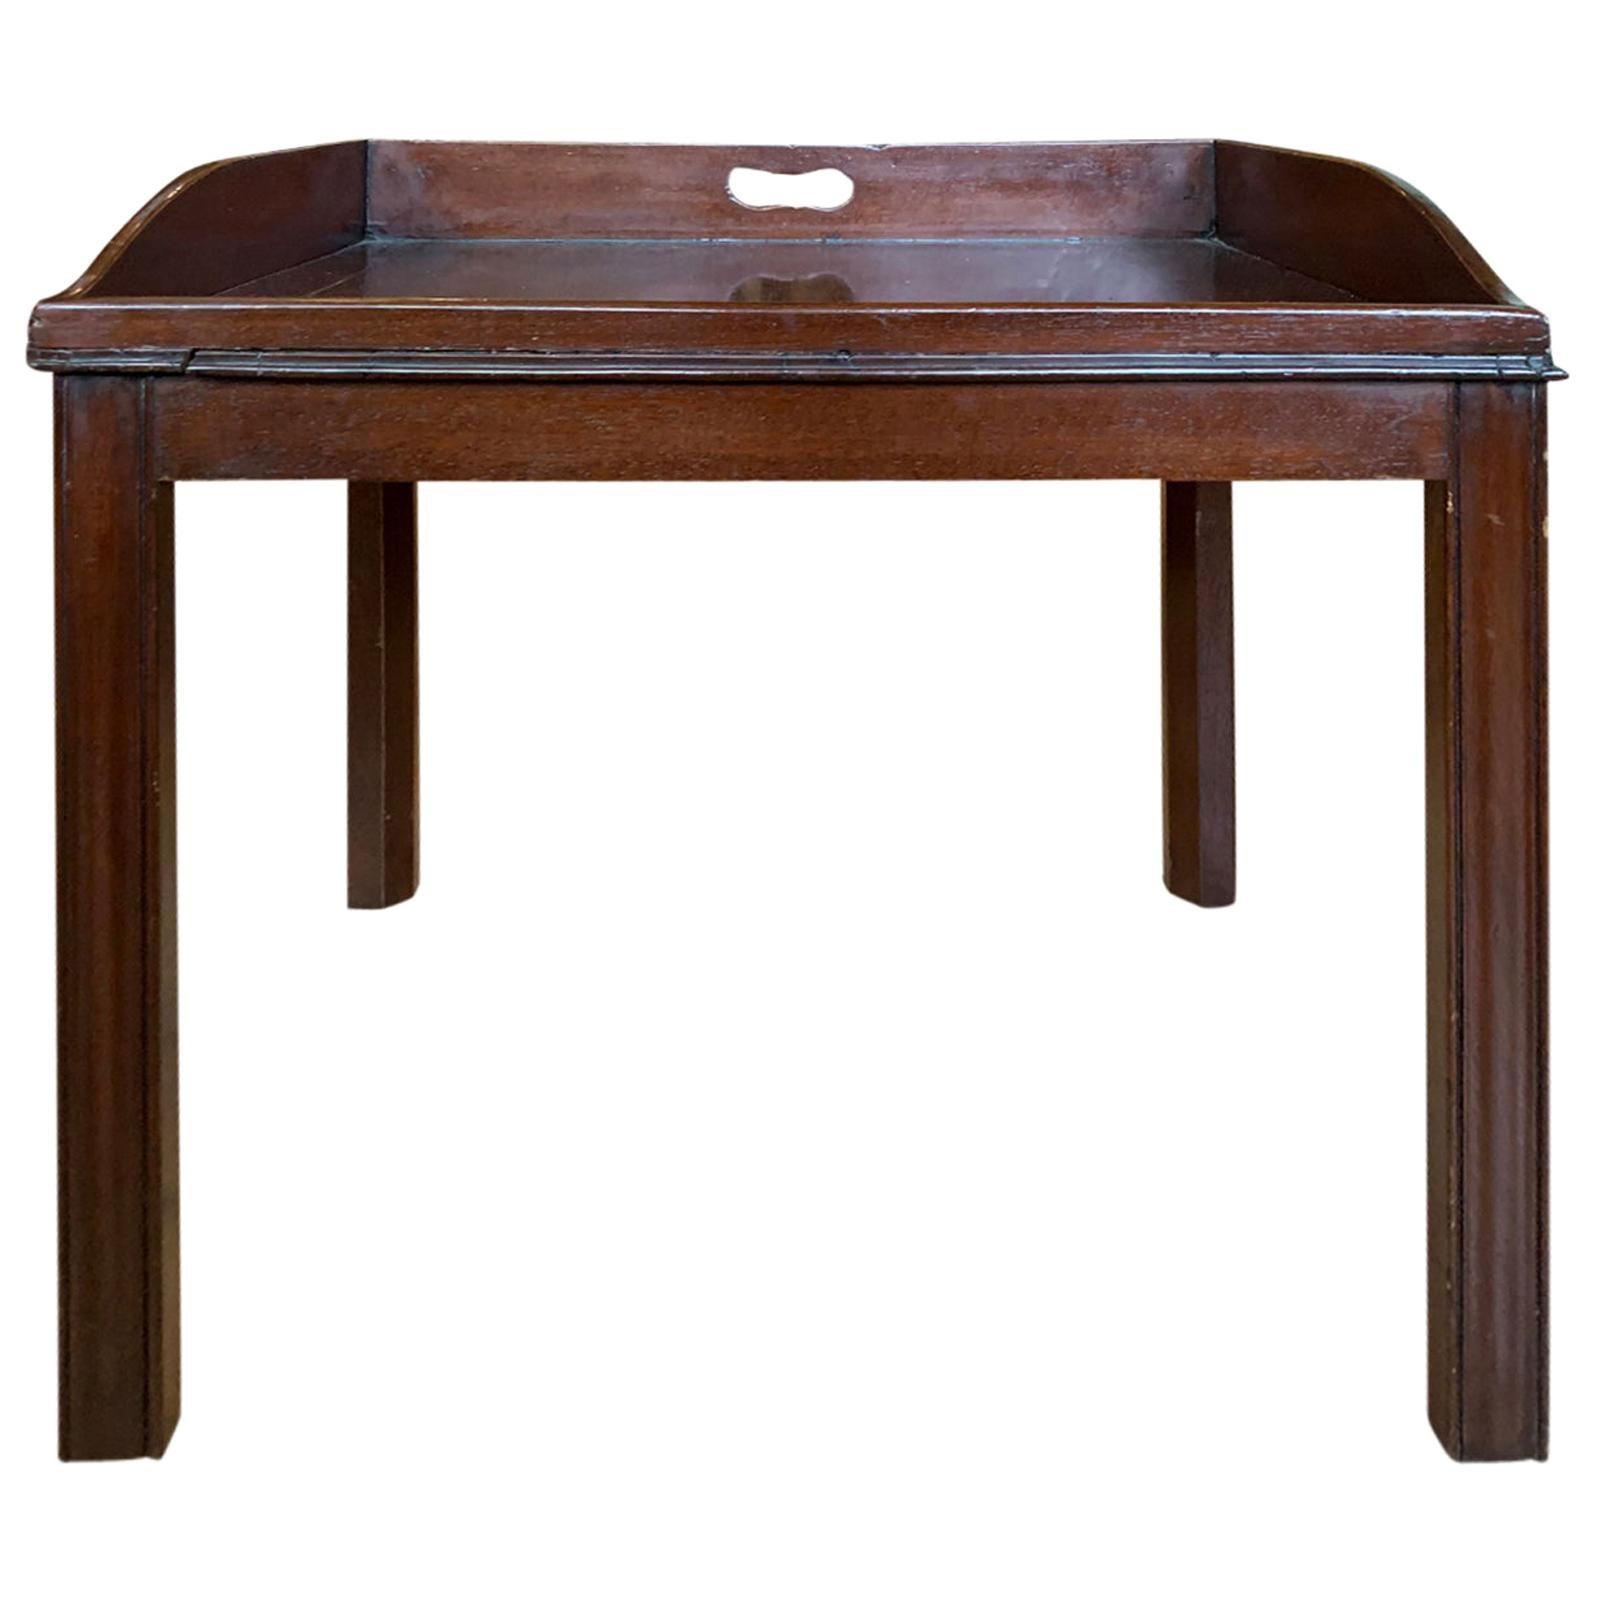 Early 19th Century English Tray Table For Sale